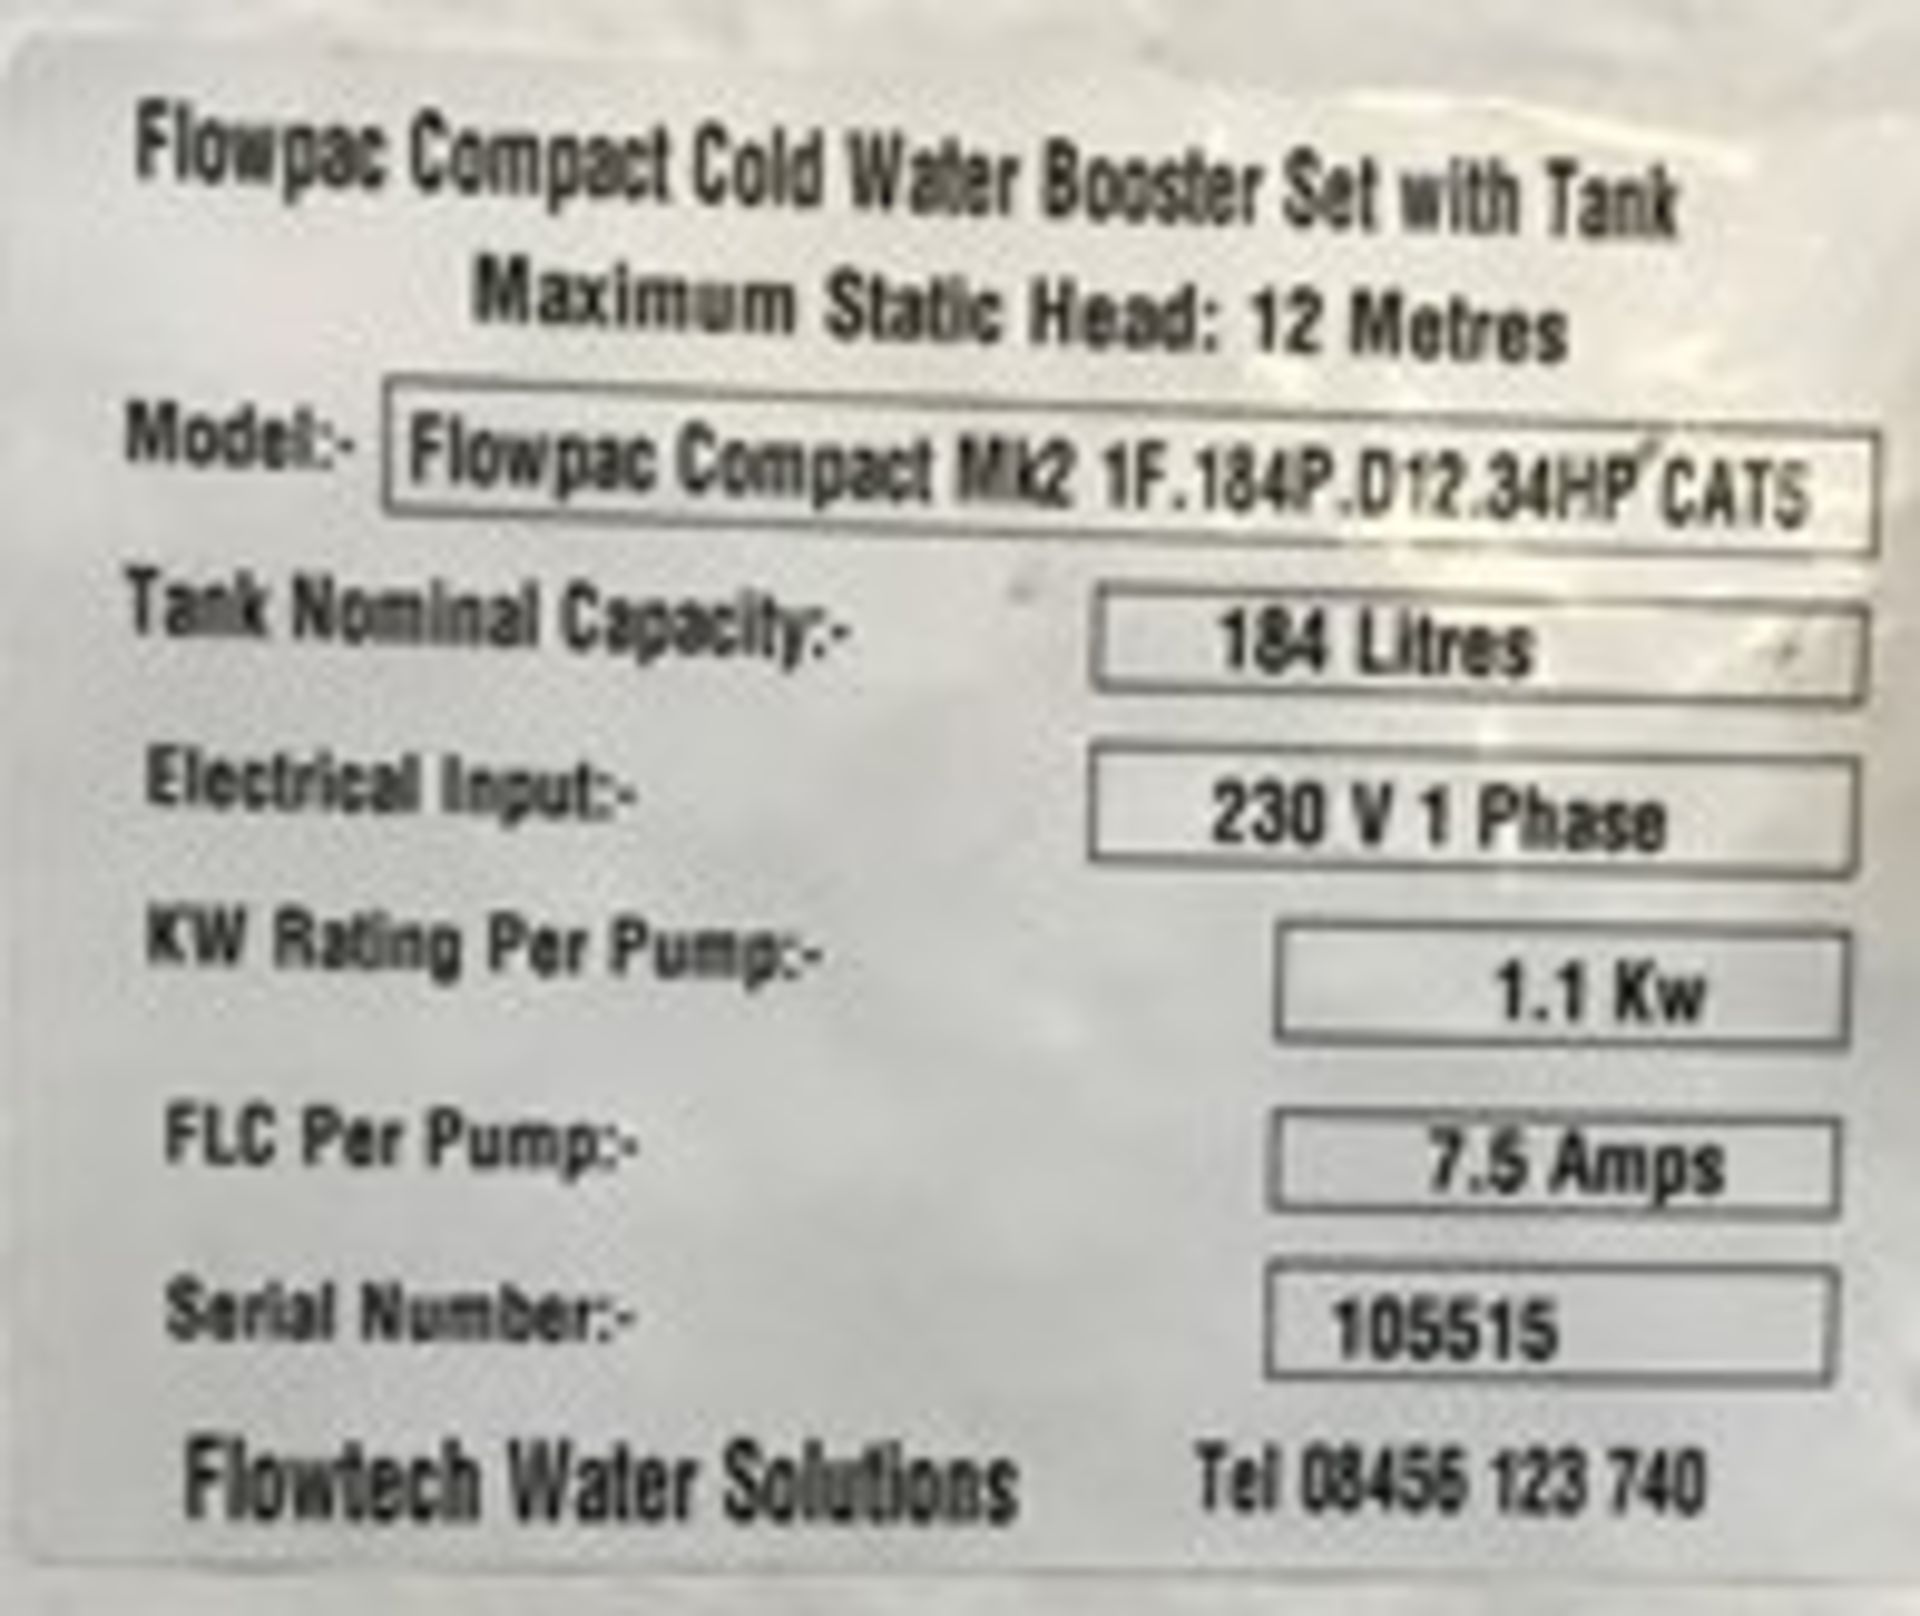 Flopac Compact Cold Water Booster Set w/ 184L Tank - Image 2 of 3